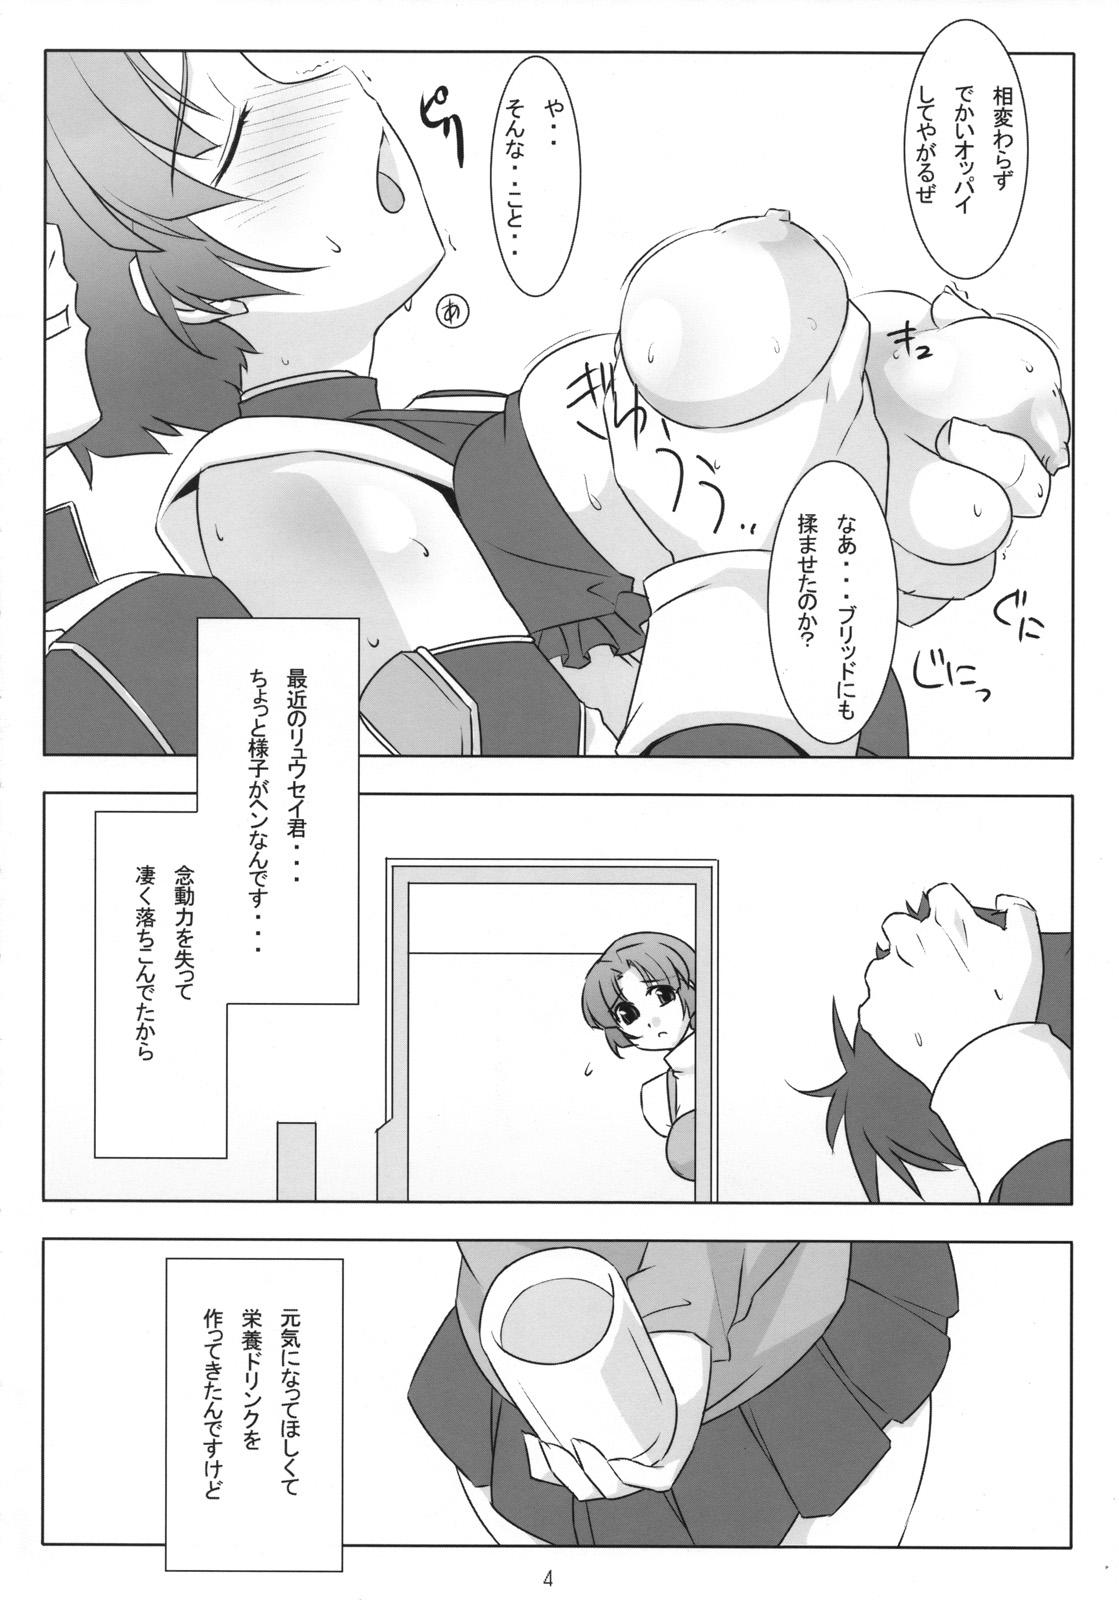 Scene CHEMICAL SOUP - Super robot wars Fuck - Page 3